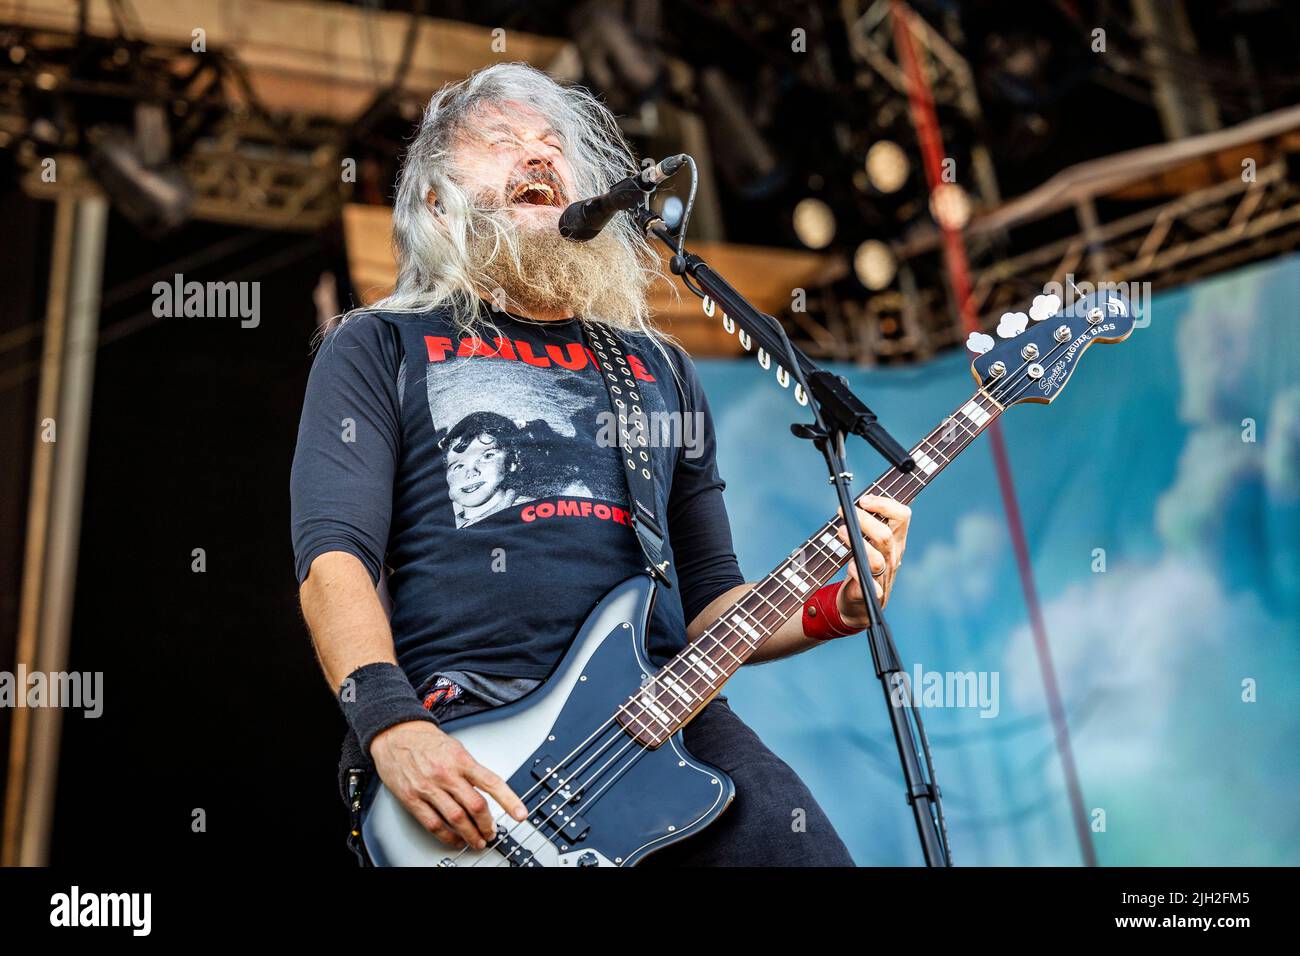 Oslo, Norway. 23rd, June 2022. The American metal band Mastodon performs a  live concert during the Norwegian music festival Tons of Rock 2022 in Oslo.  Here vocalist and bass player Troy Sanders